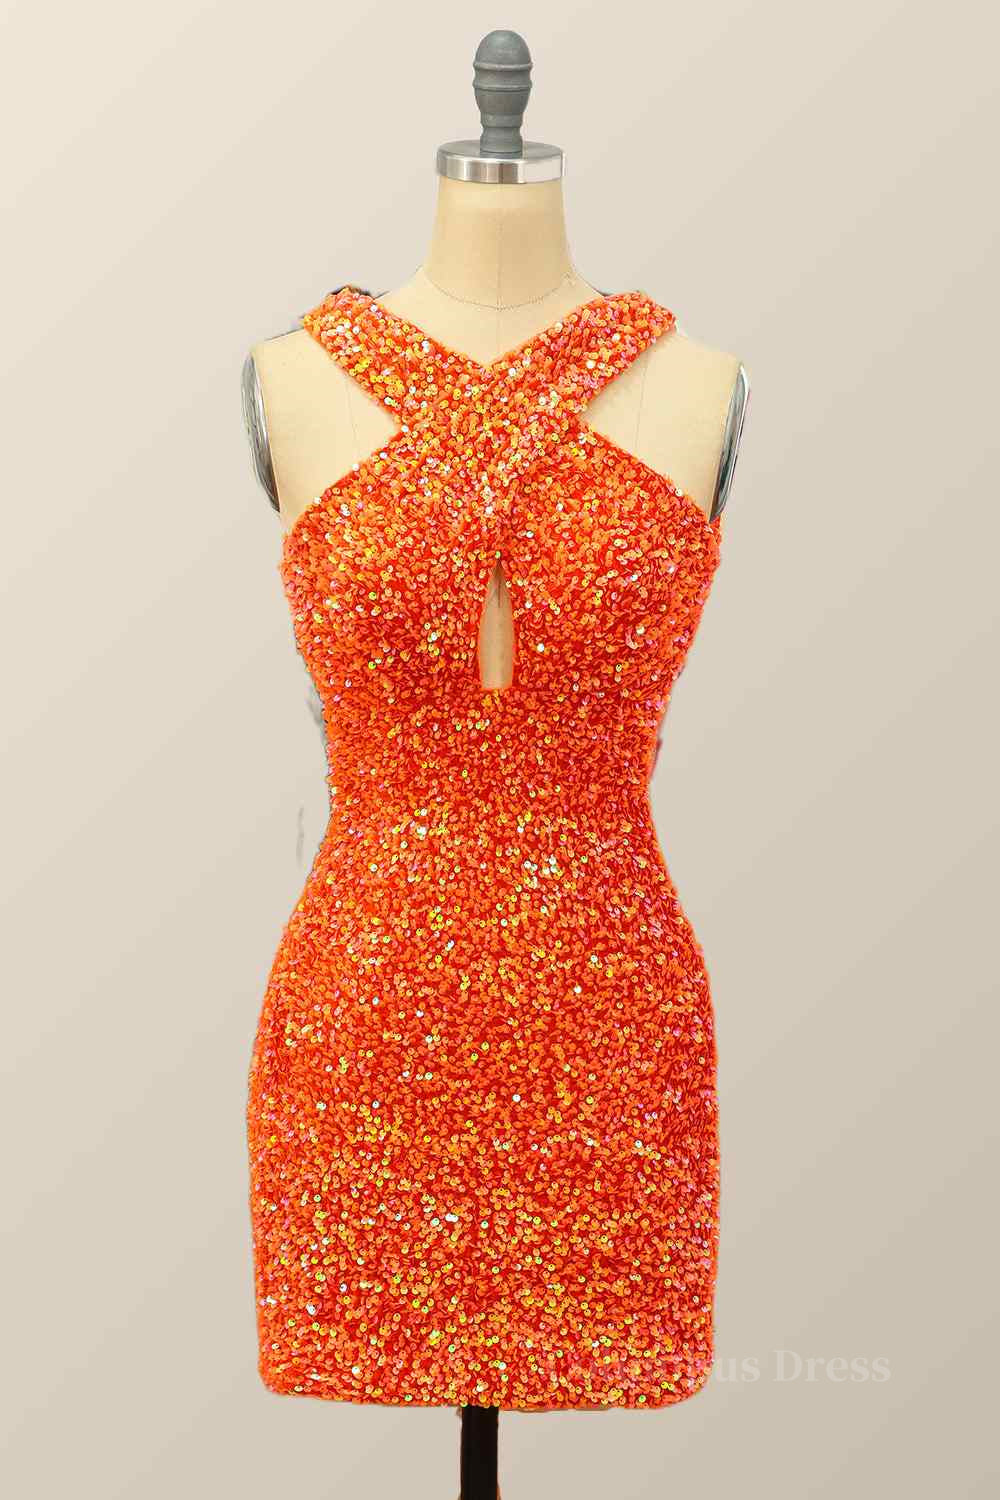 Orange Sheath Halter Sequins Cut-Out Mini Corset Homecoming Dress outfit, Formal Dress Wear For Ladies